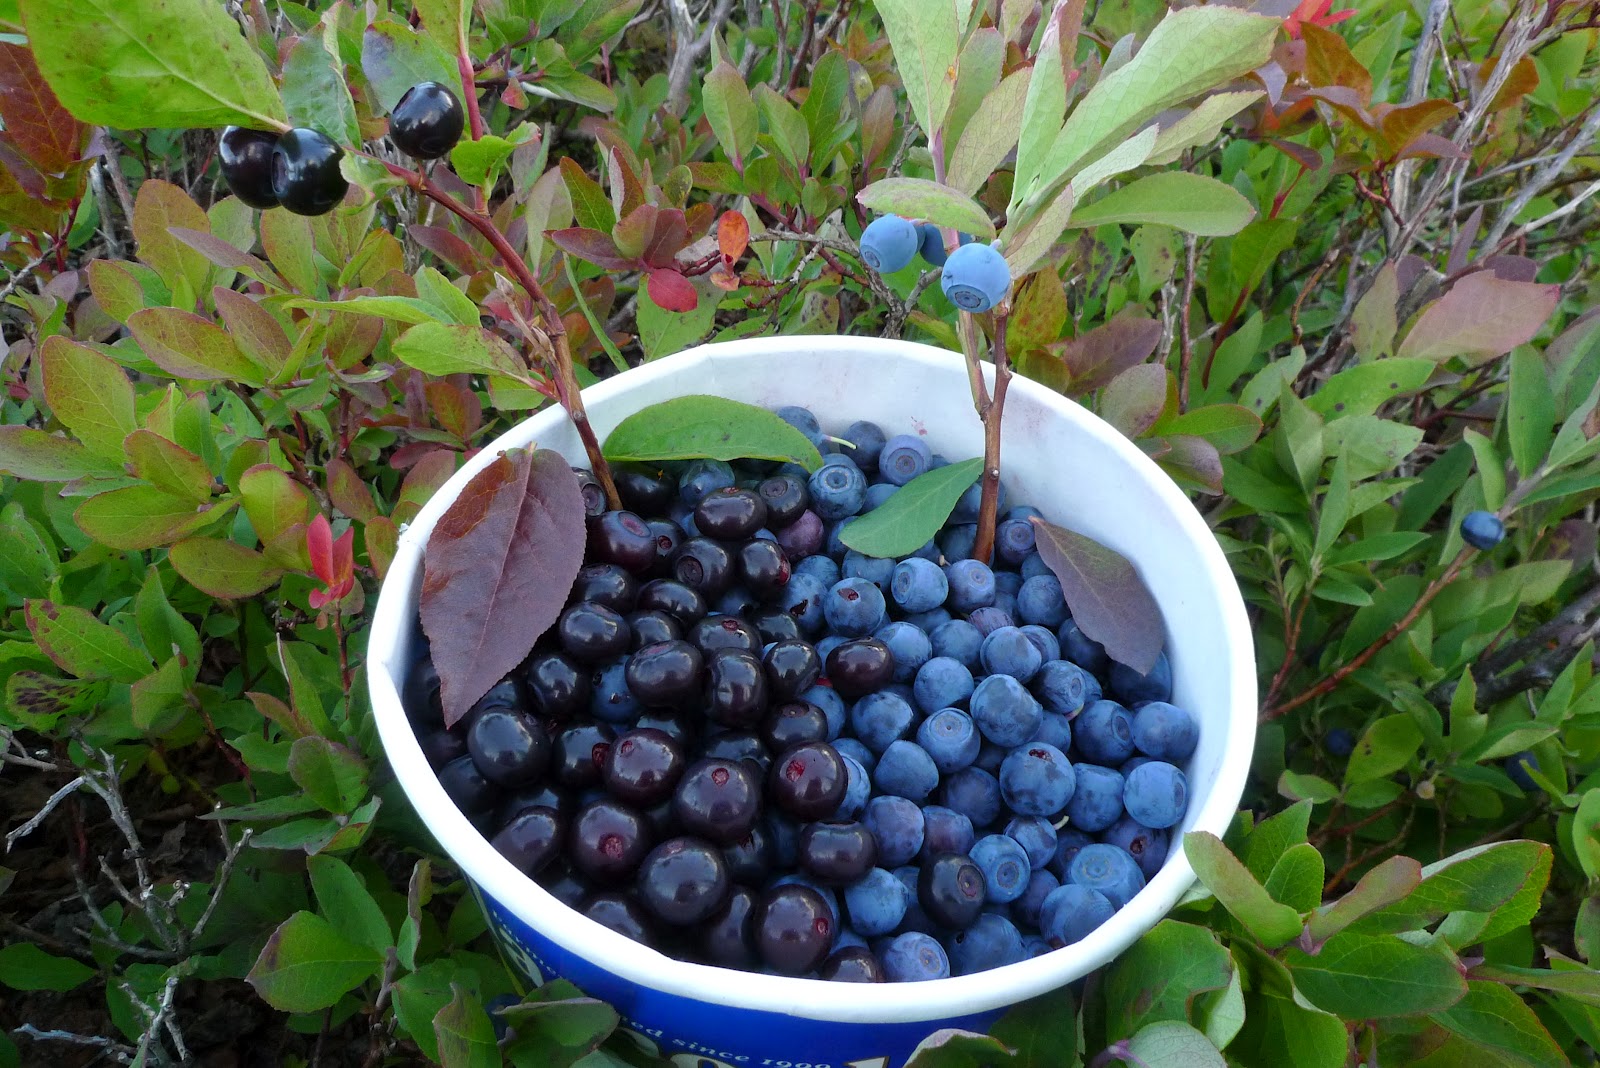 Wild Harvests: "Wild Blueberries," the Mountain Provides!